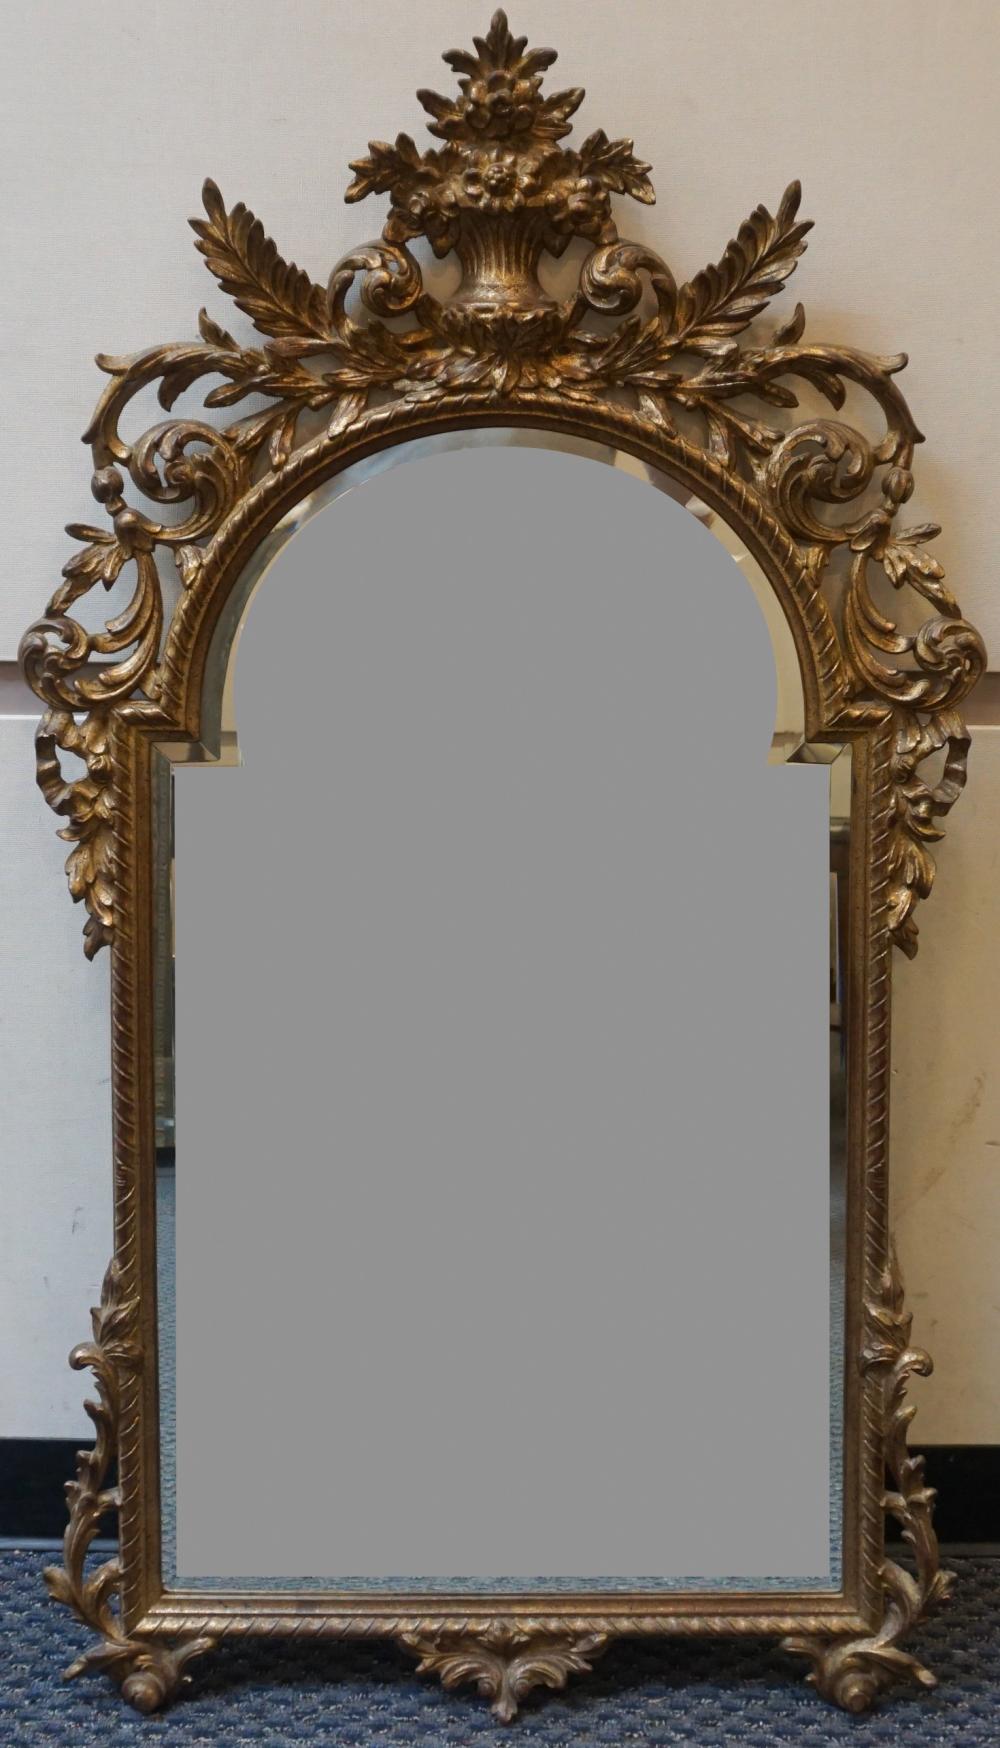 LOUIS XV STYLE GILT GESSO DECORATED